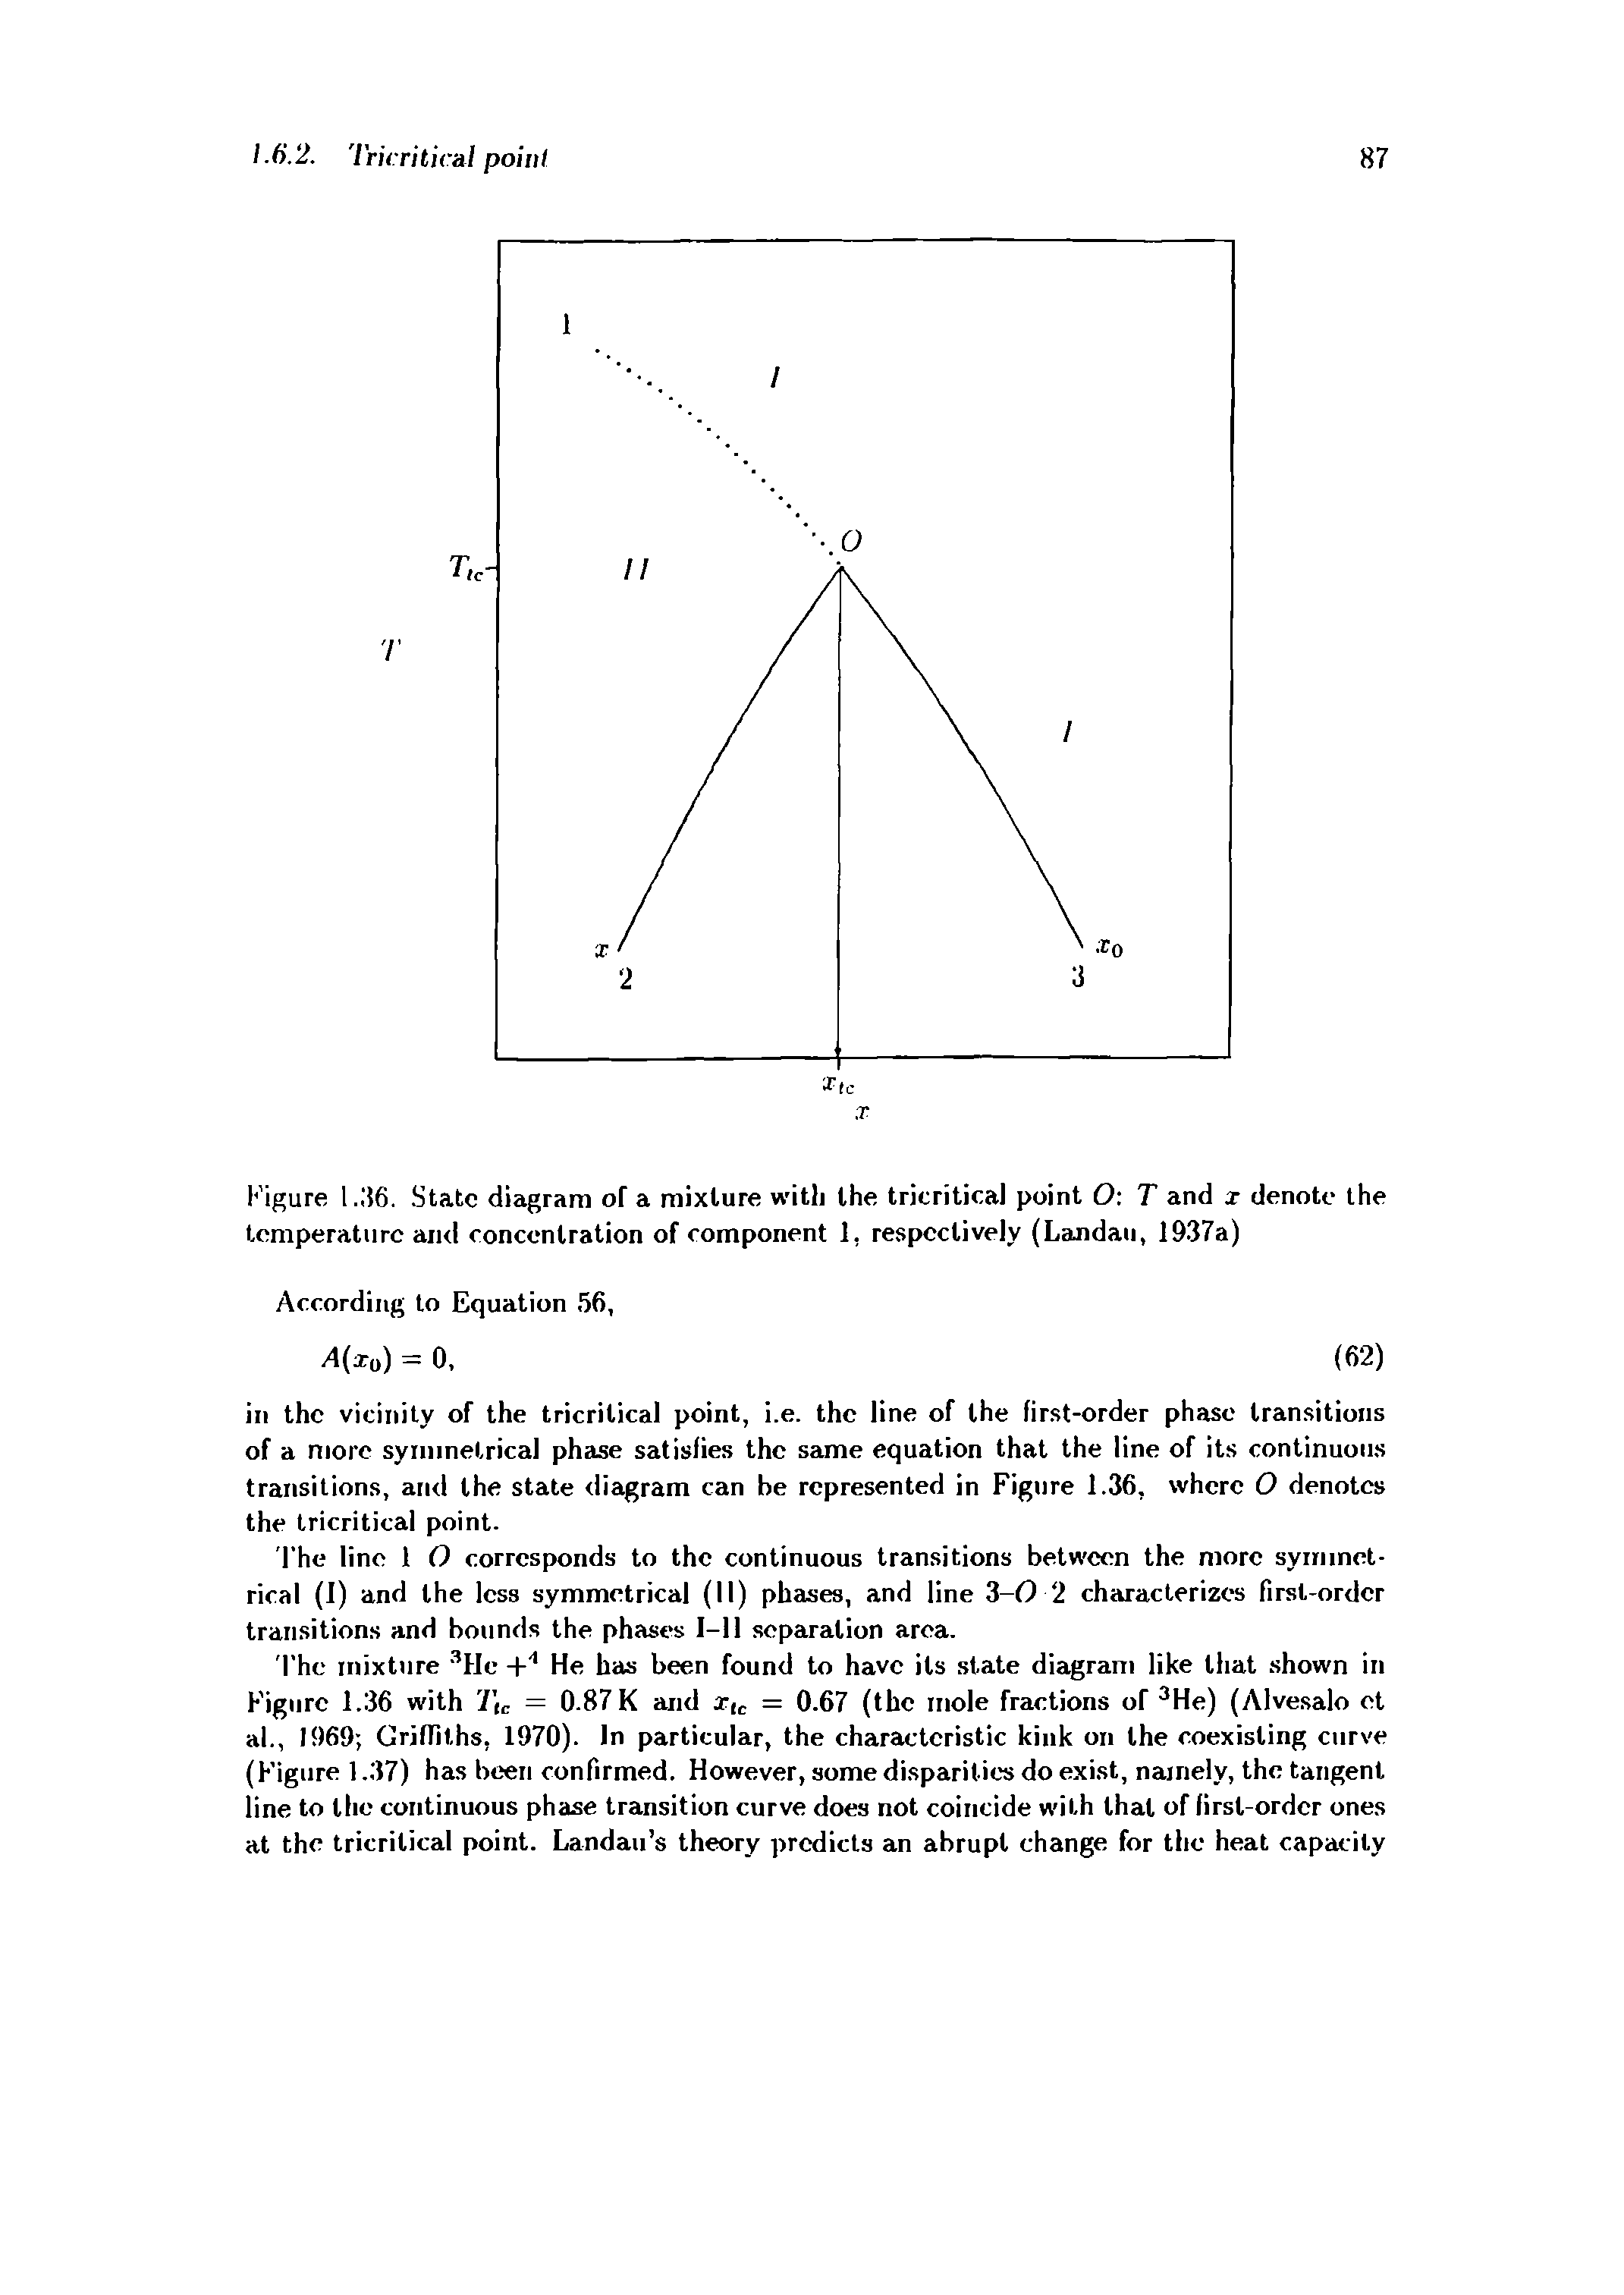 Figure 1., 56. State diagram of a mixture witli the tricritical point O T and x denote the temperature and concentration of component 1, respectively (Landau, 1937a)...